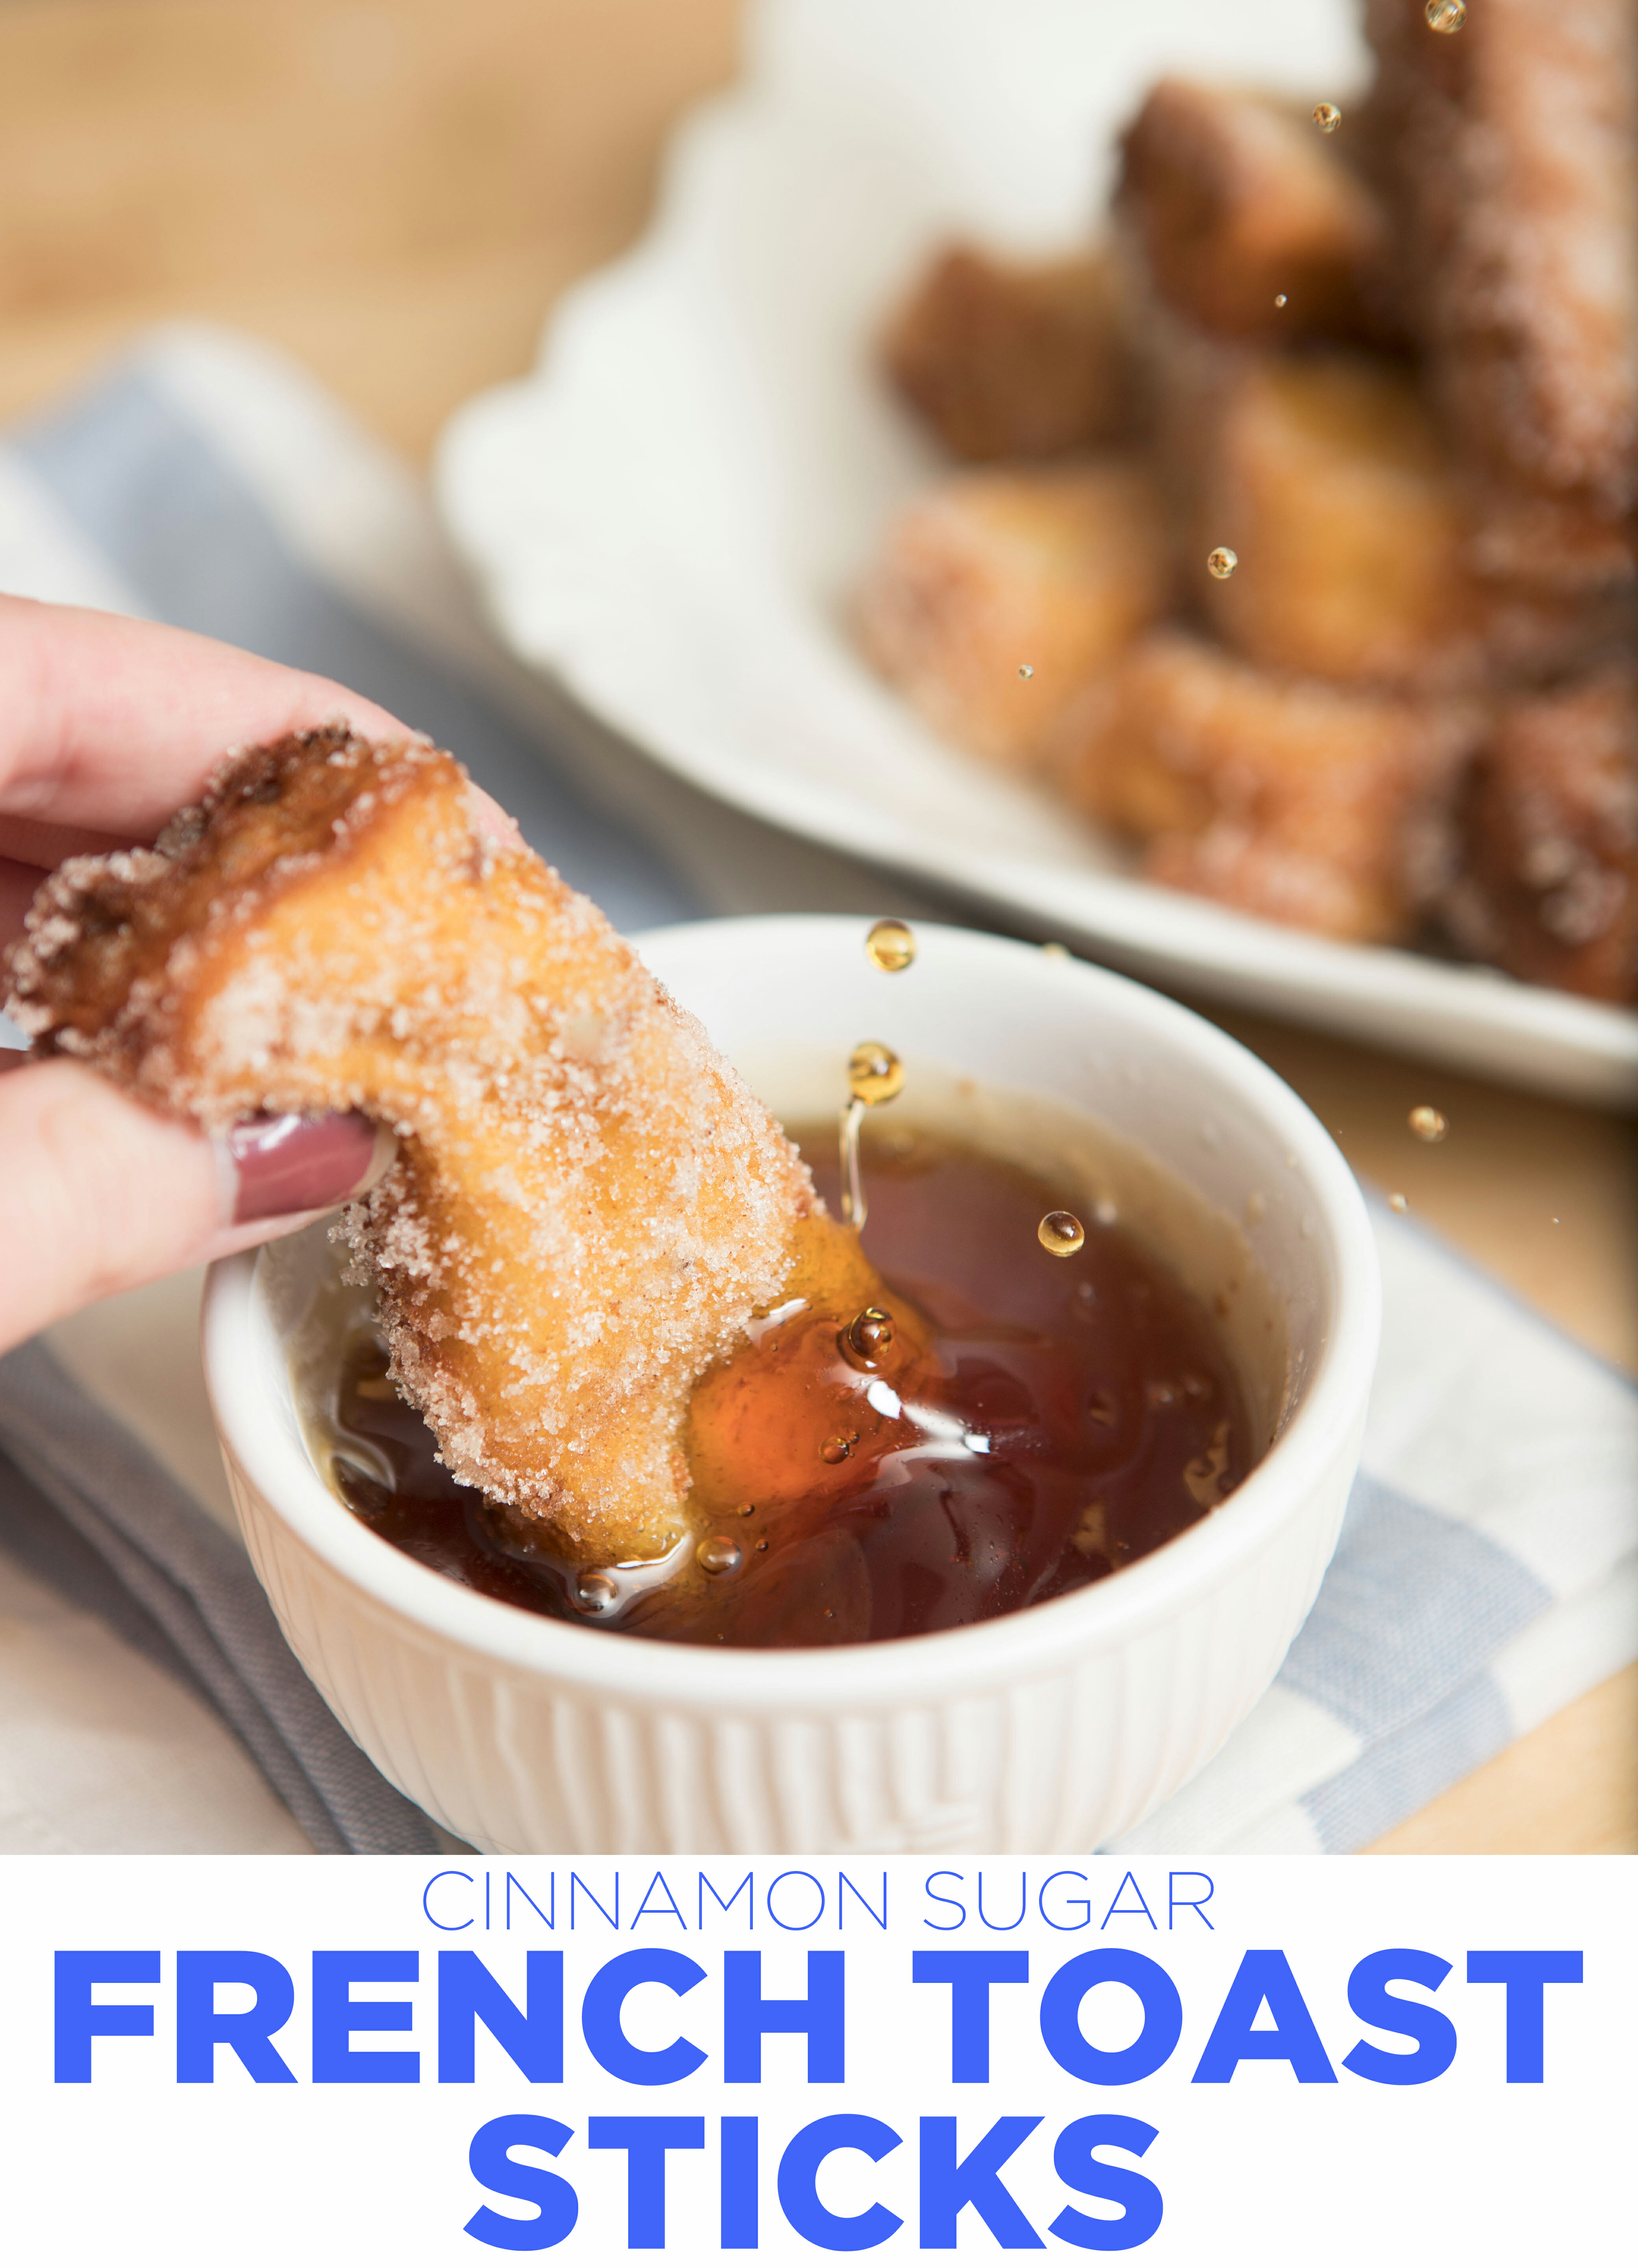 dunking french toast stick in syrup